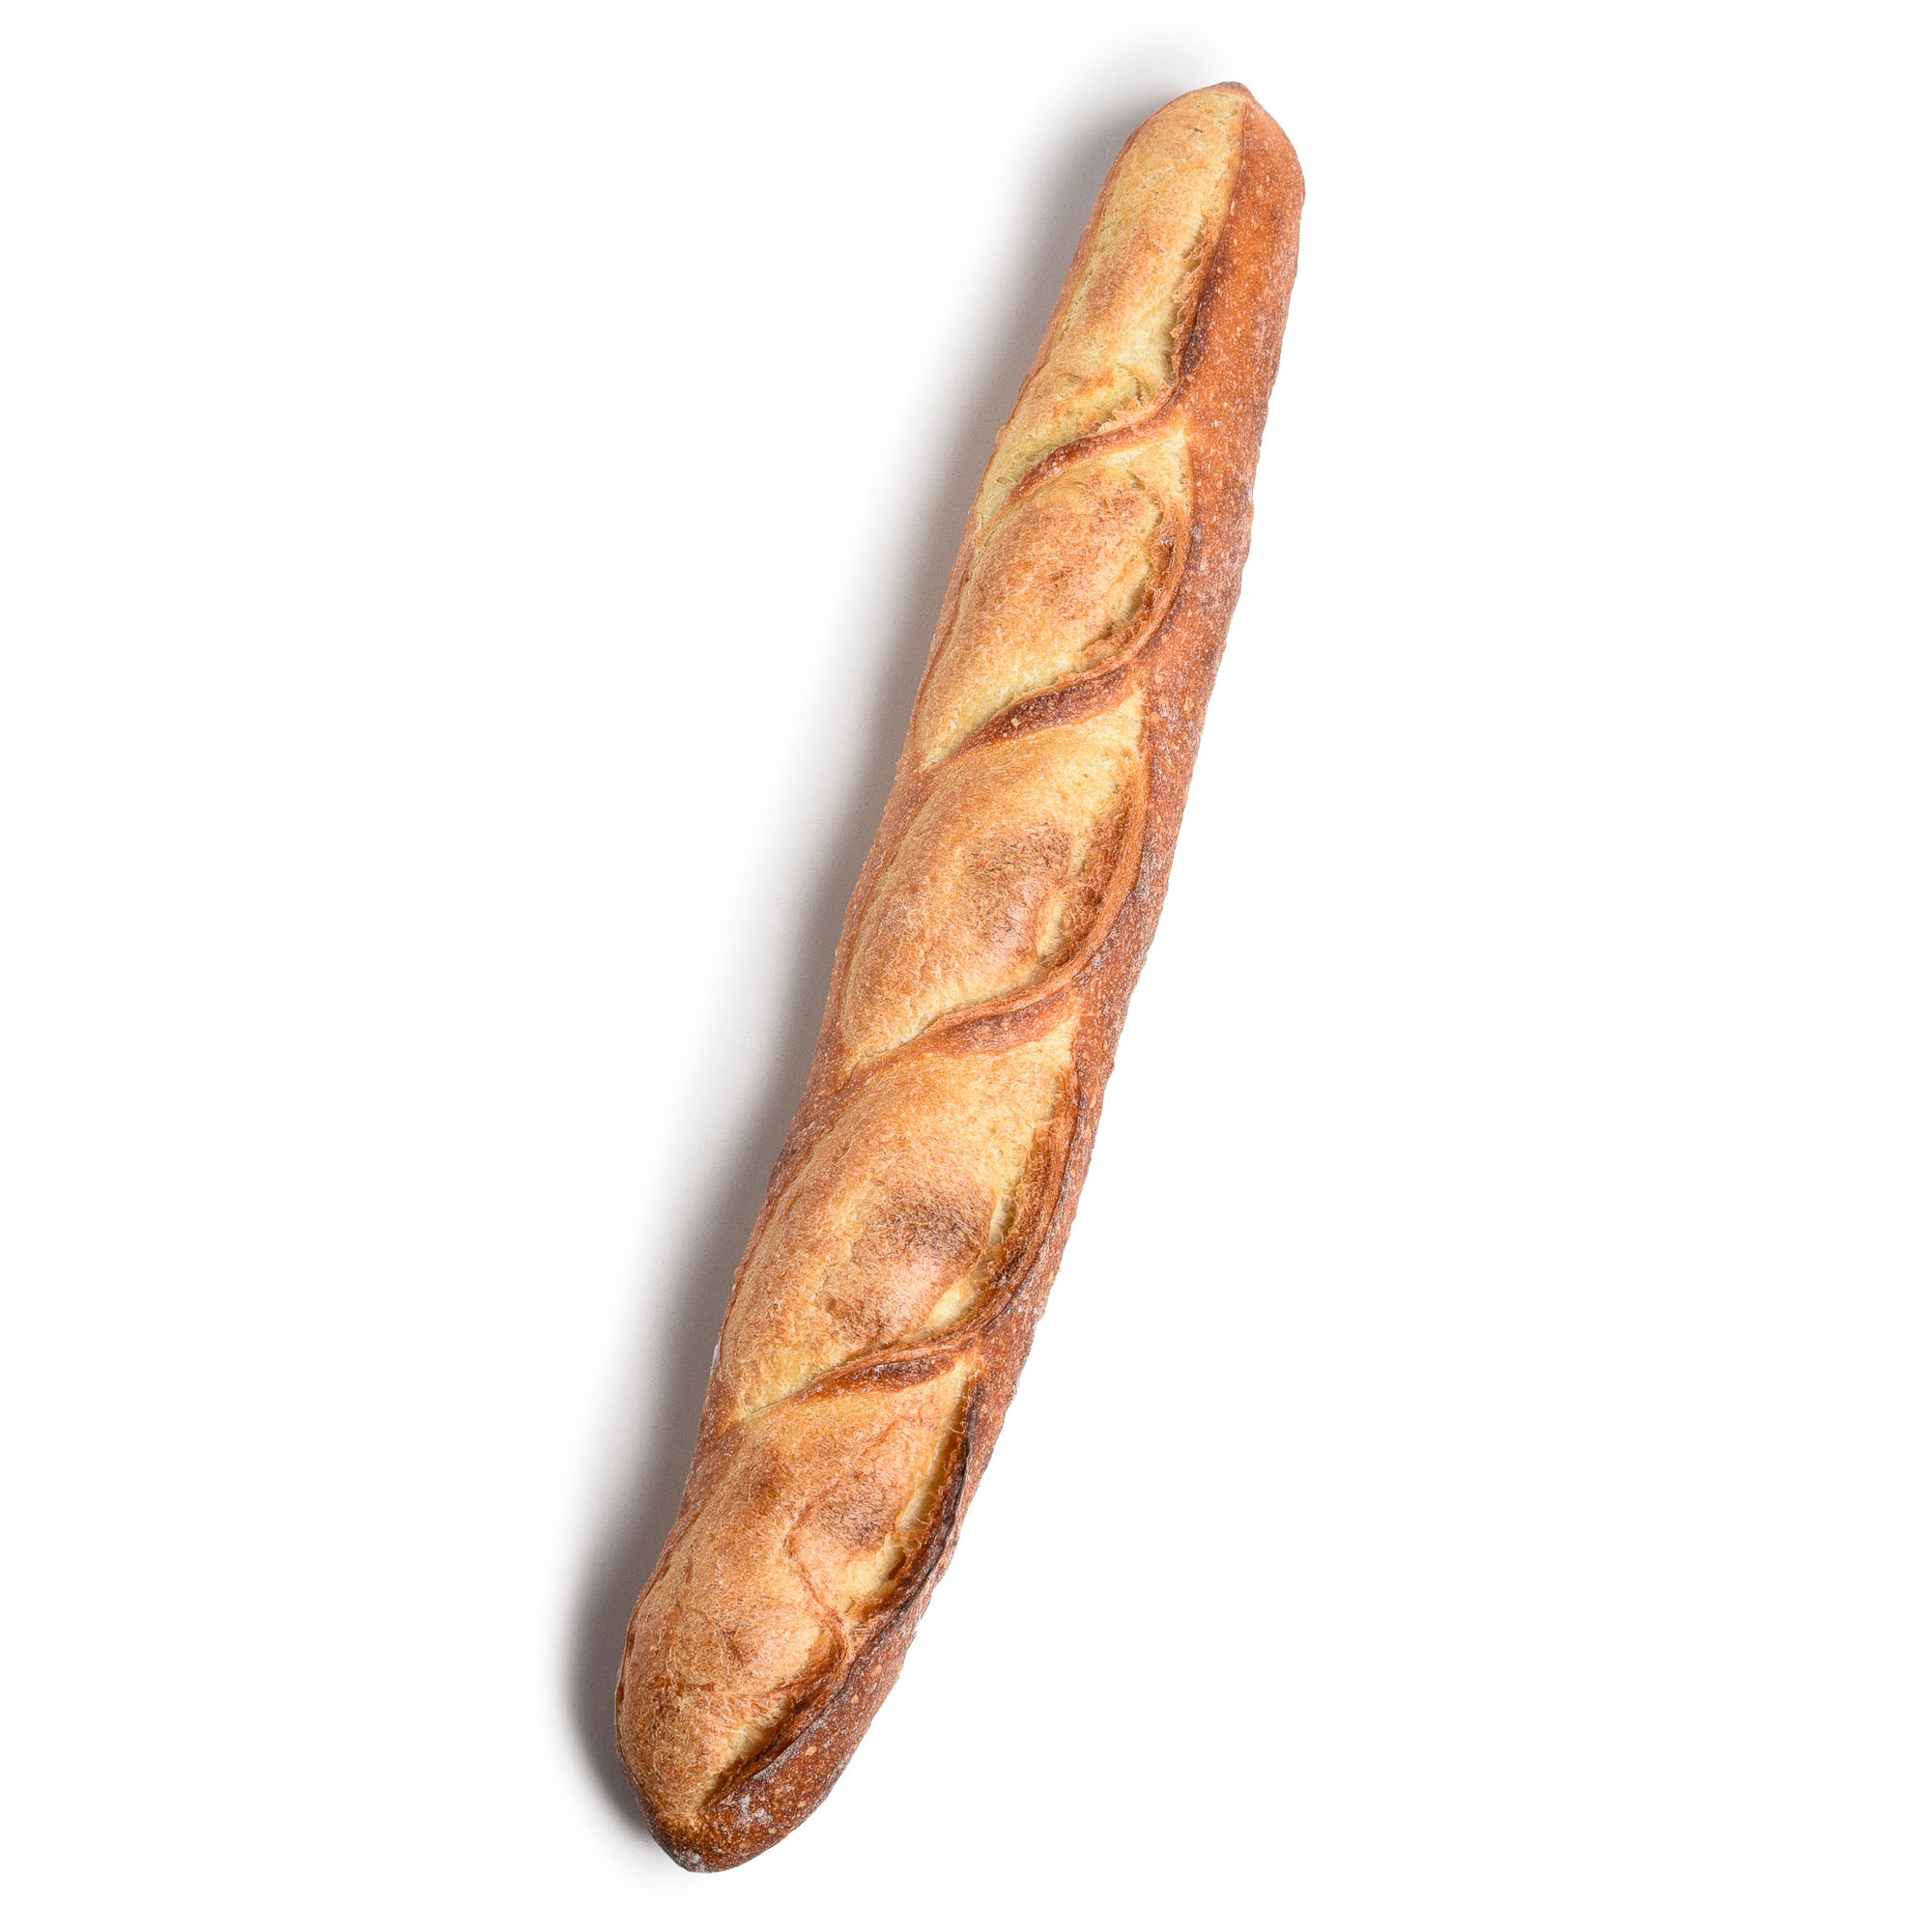 Le fournil bakery traditional French baguette